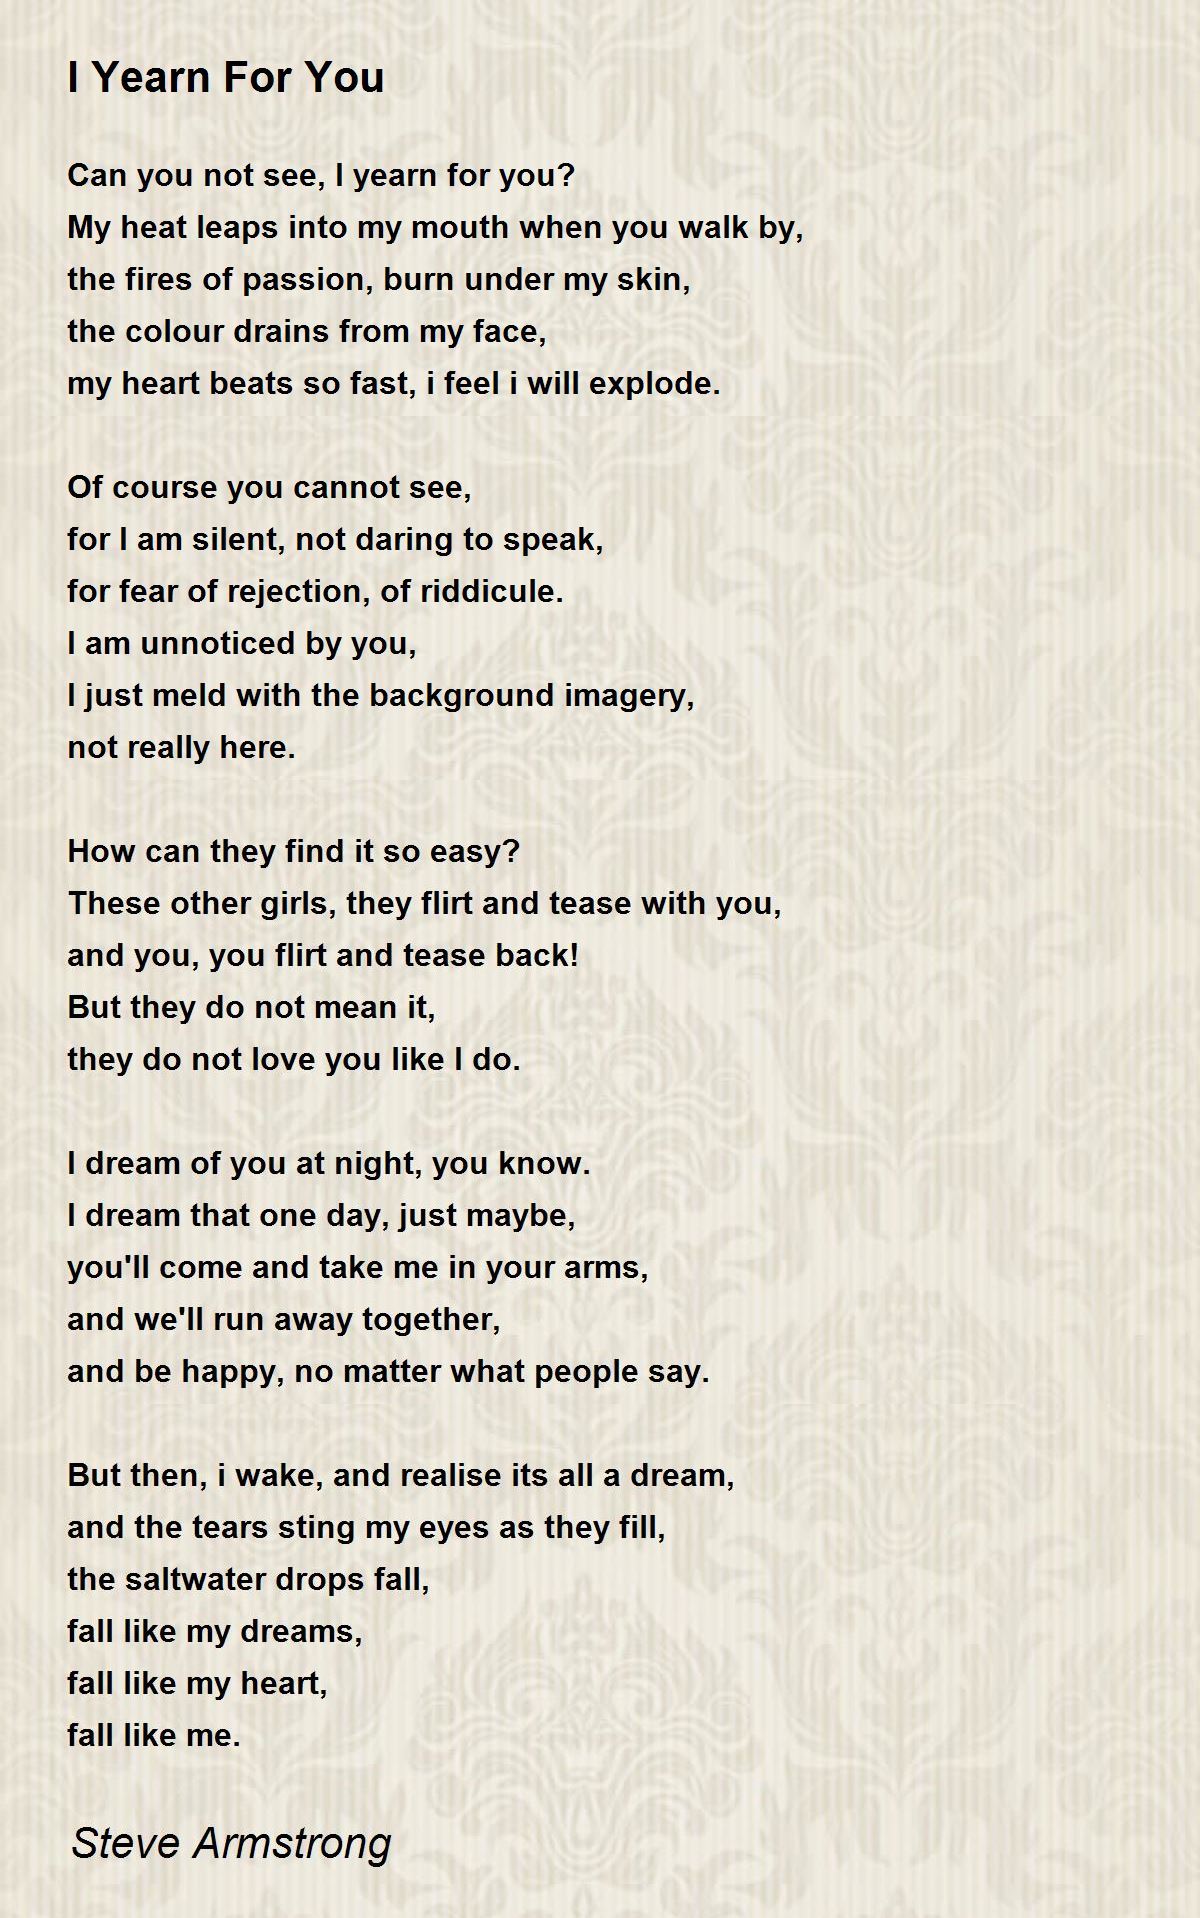 I Yearn For You - I Yearn For You Poem by Steve Armstrong